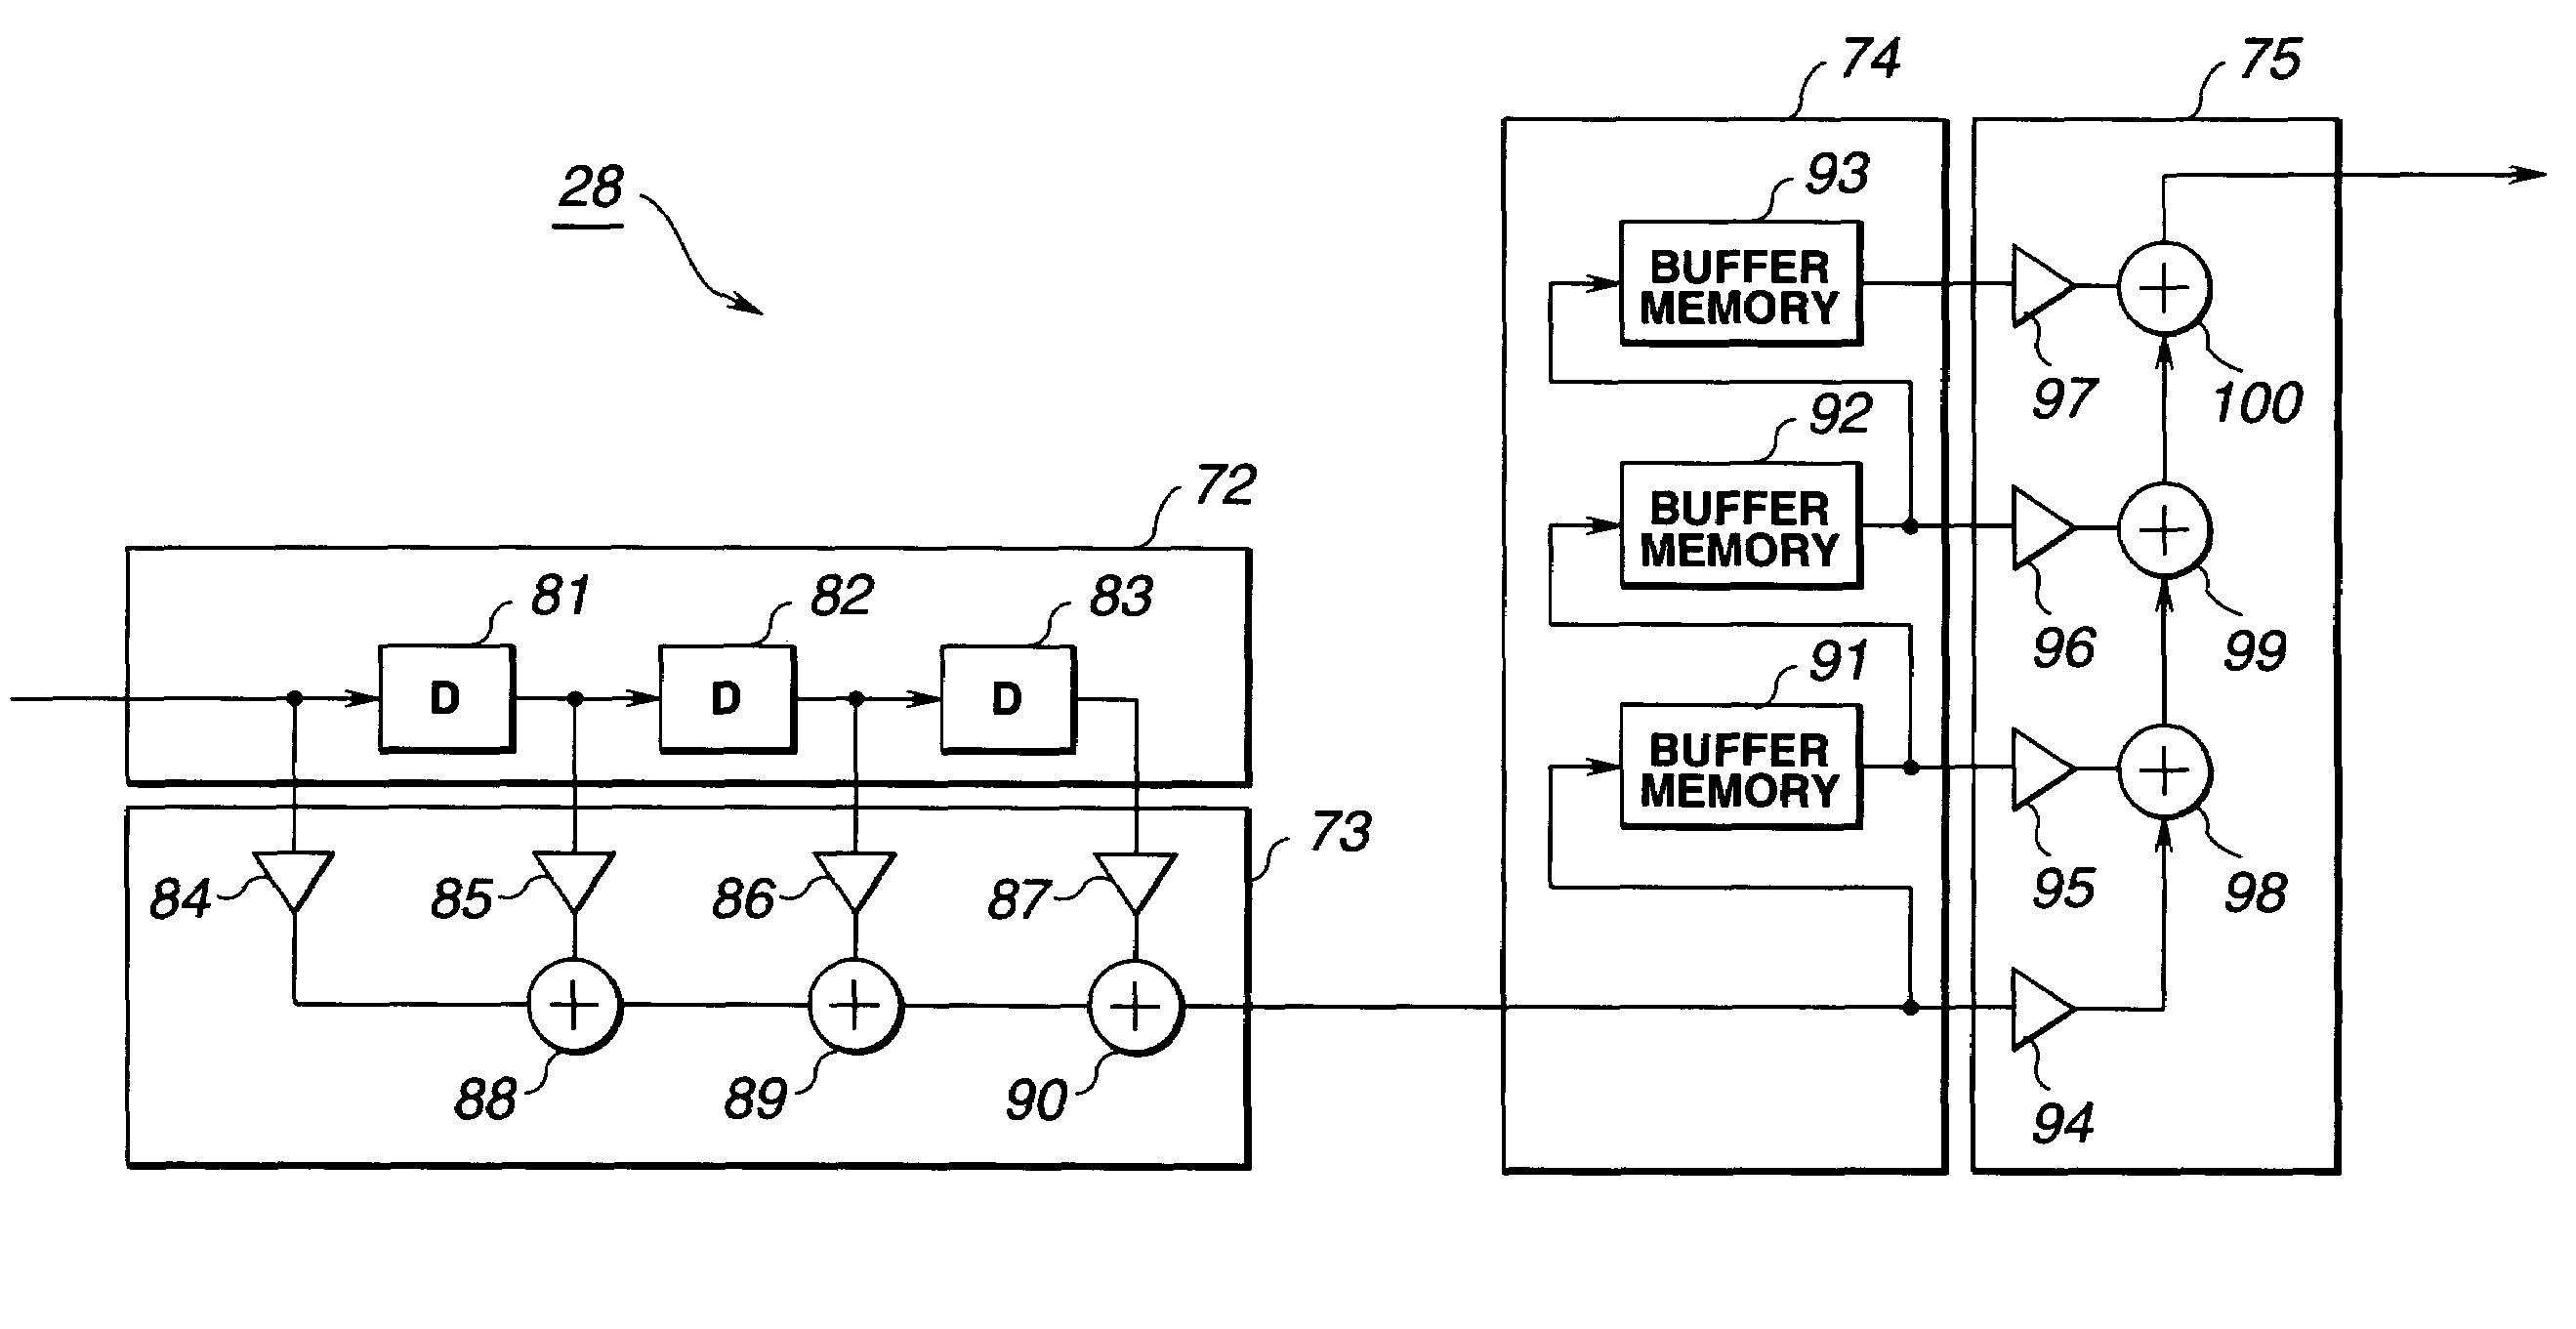 Imaging apparatus with delay and processor to weight lines of delayed image data